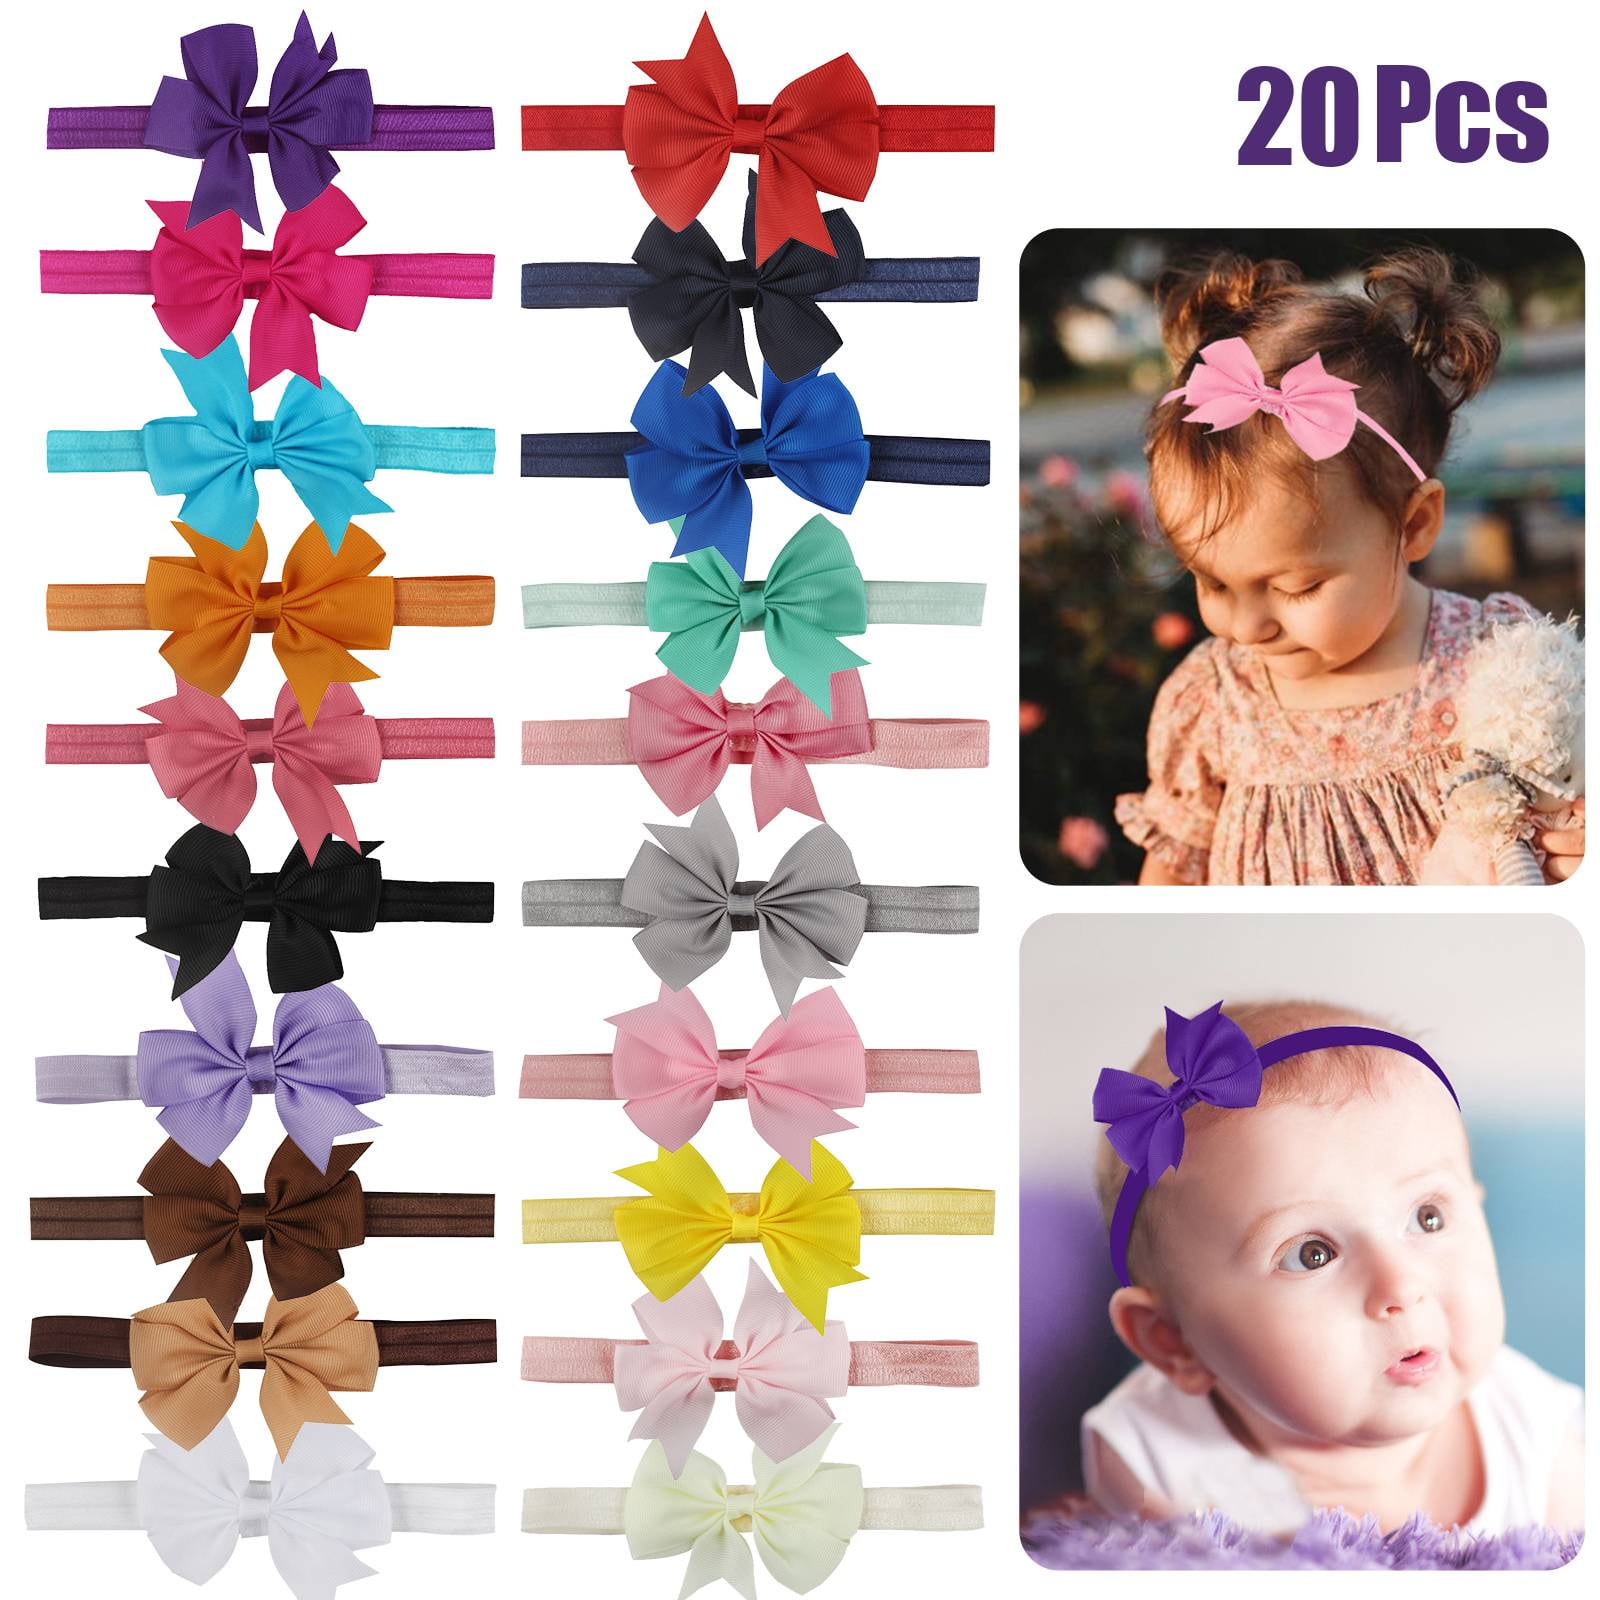 20X Baby Girls Hairband Toddler Hair Bow Band Grosgrain Ribbon Accessories FO 